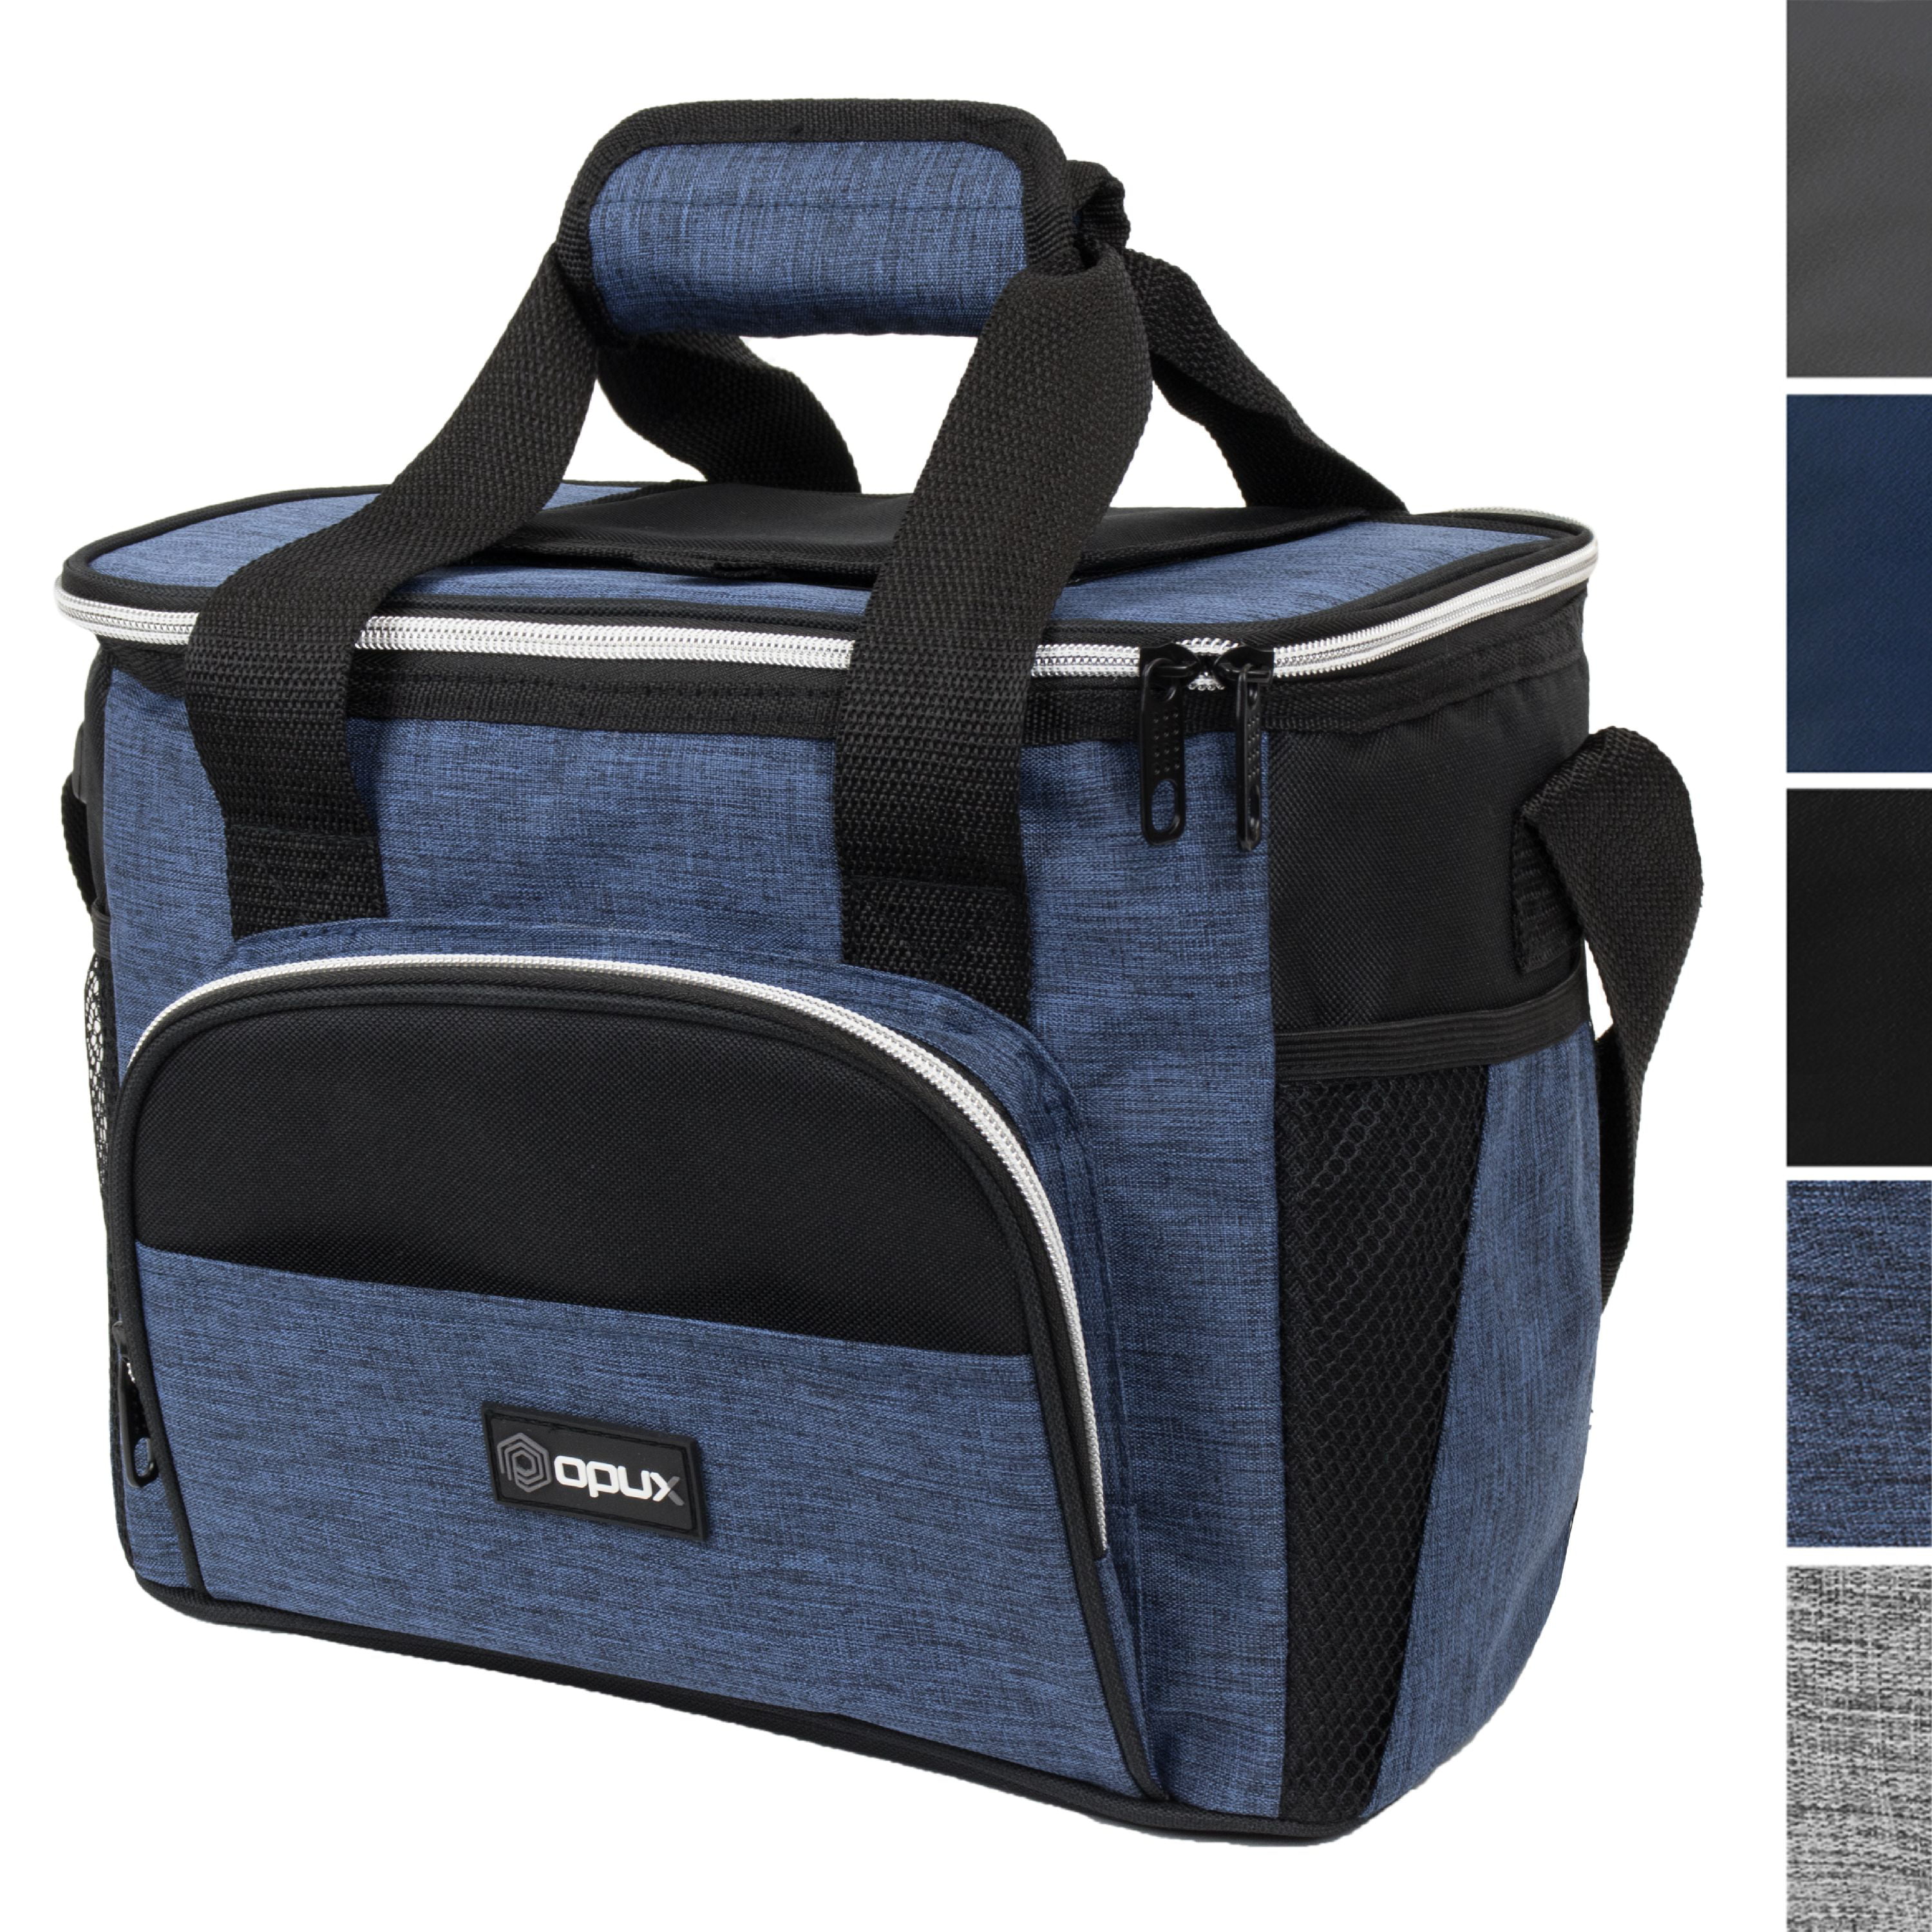 OPUX Insulated Small Cooler Bag for Travel Soft Collapsible Cooler Bag for Family Camping